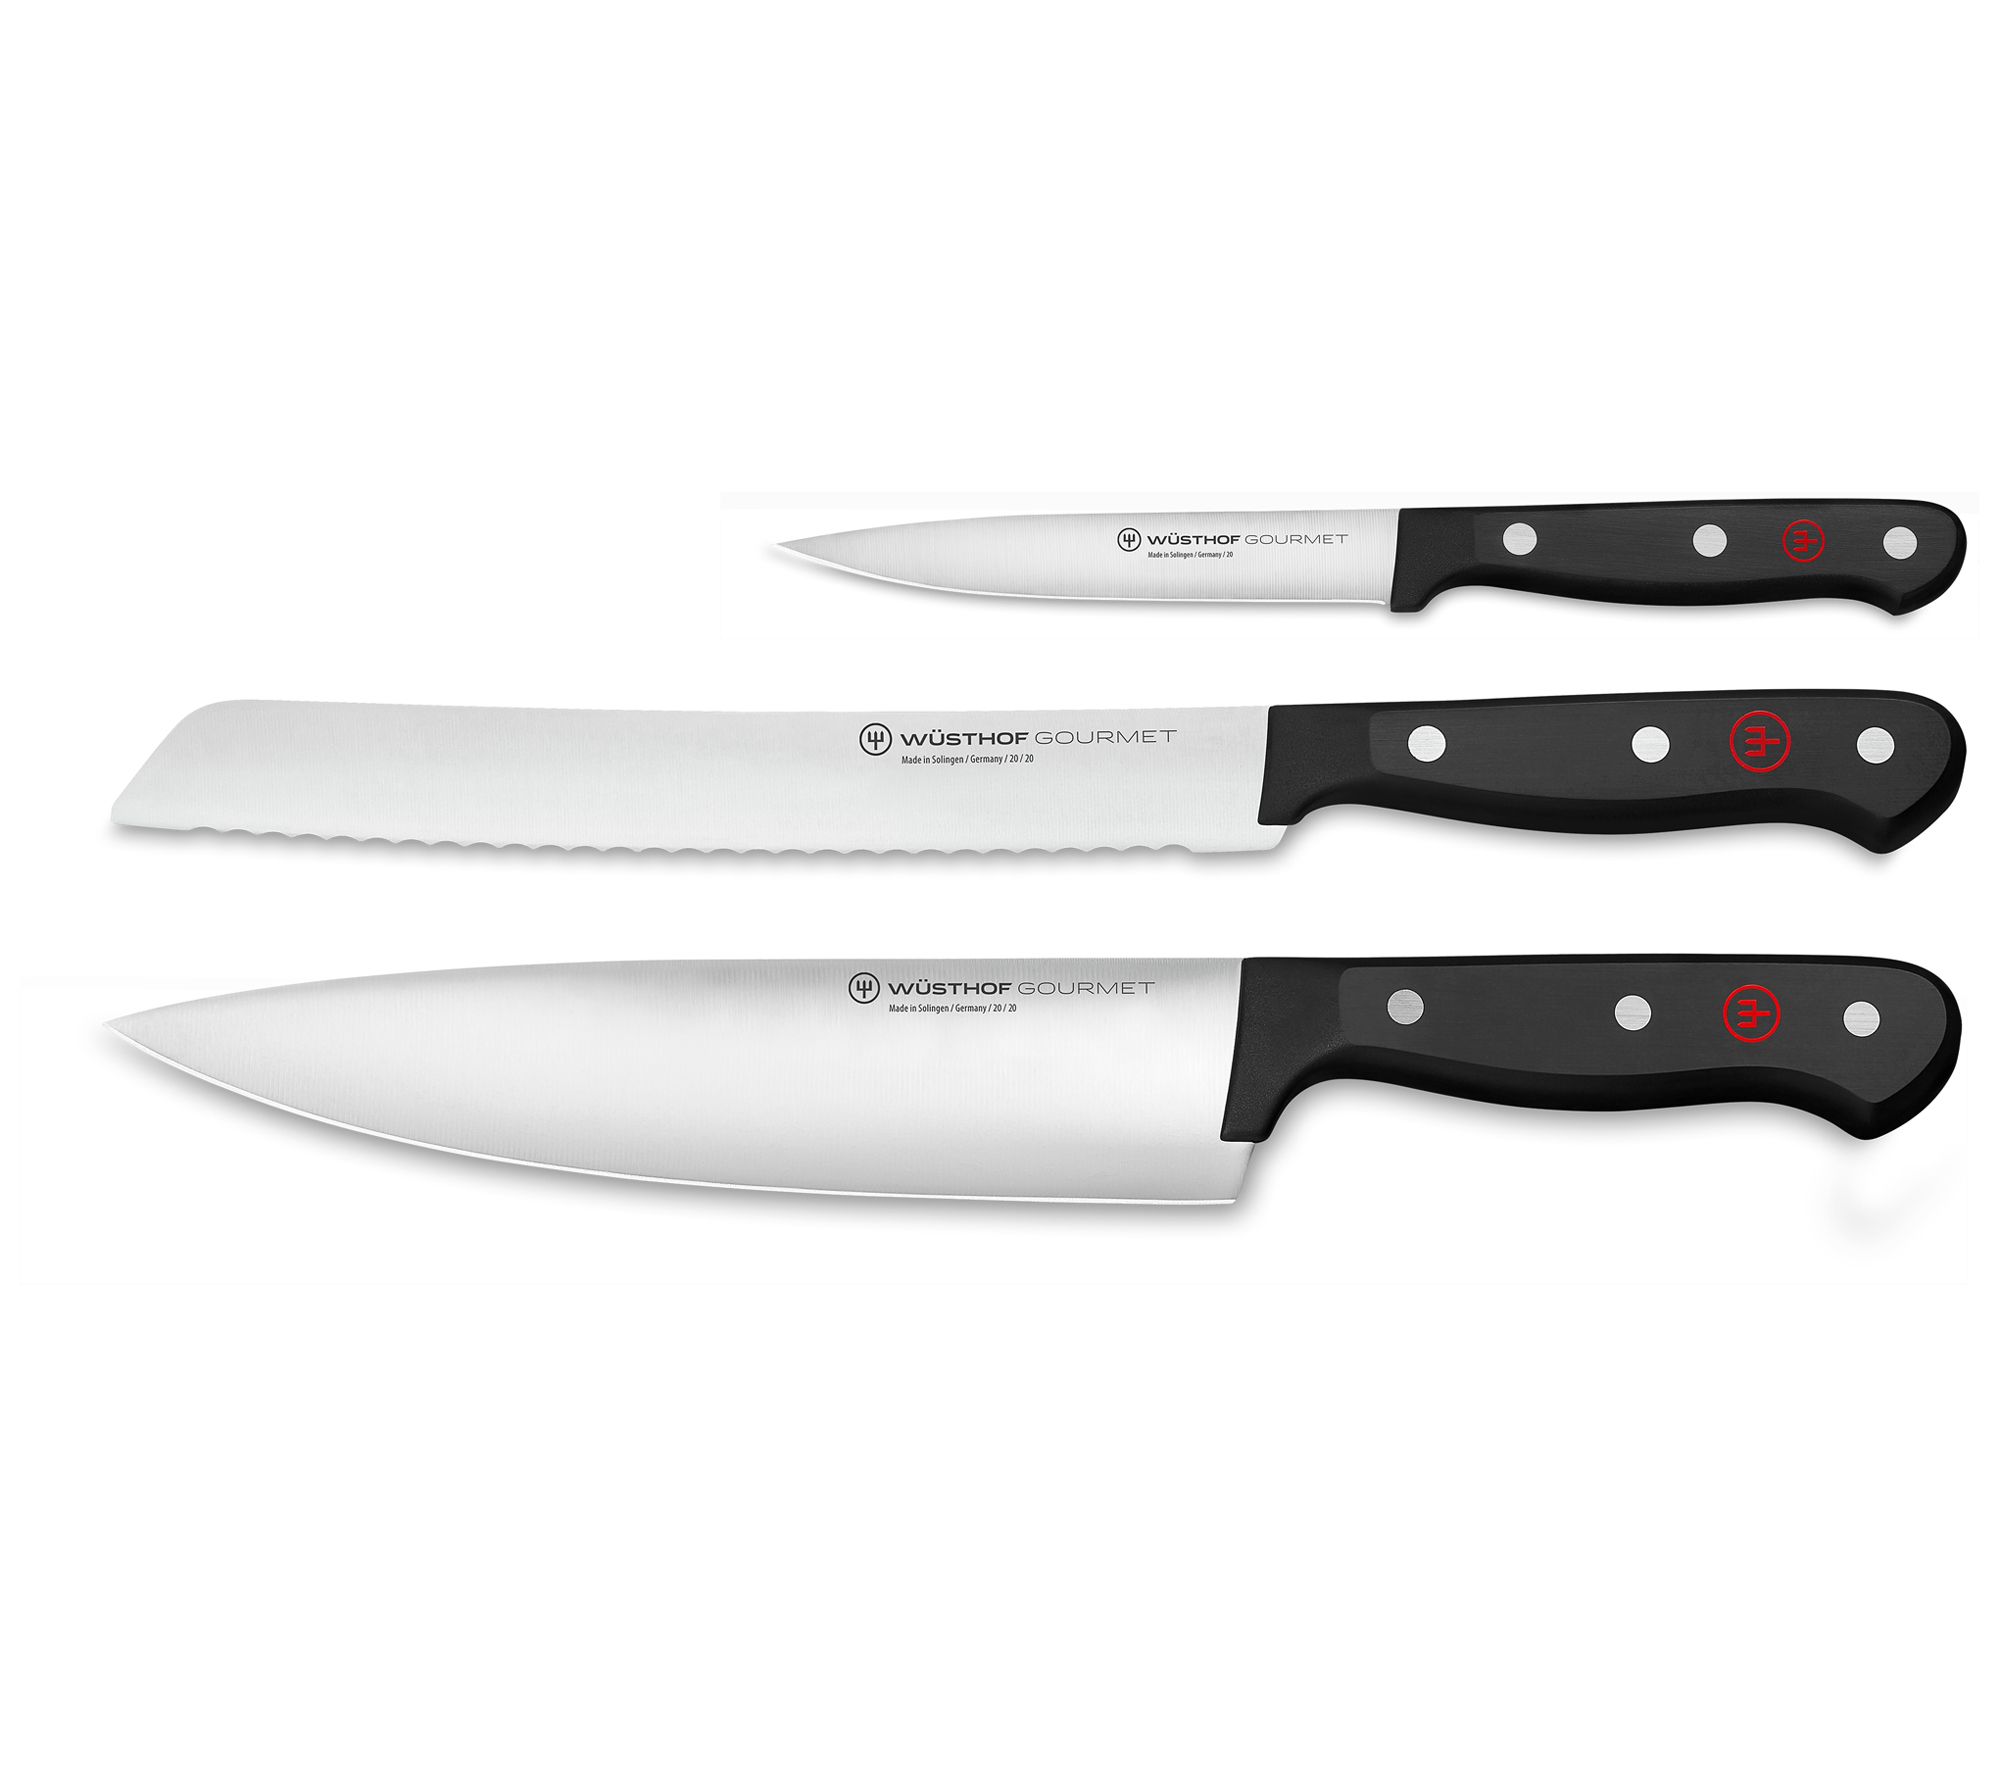 Brazilian Flame 10 in. Chef Picanha Stainless Steel Knife Set with Sharpener, Blue